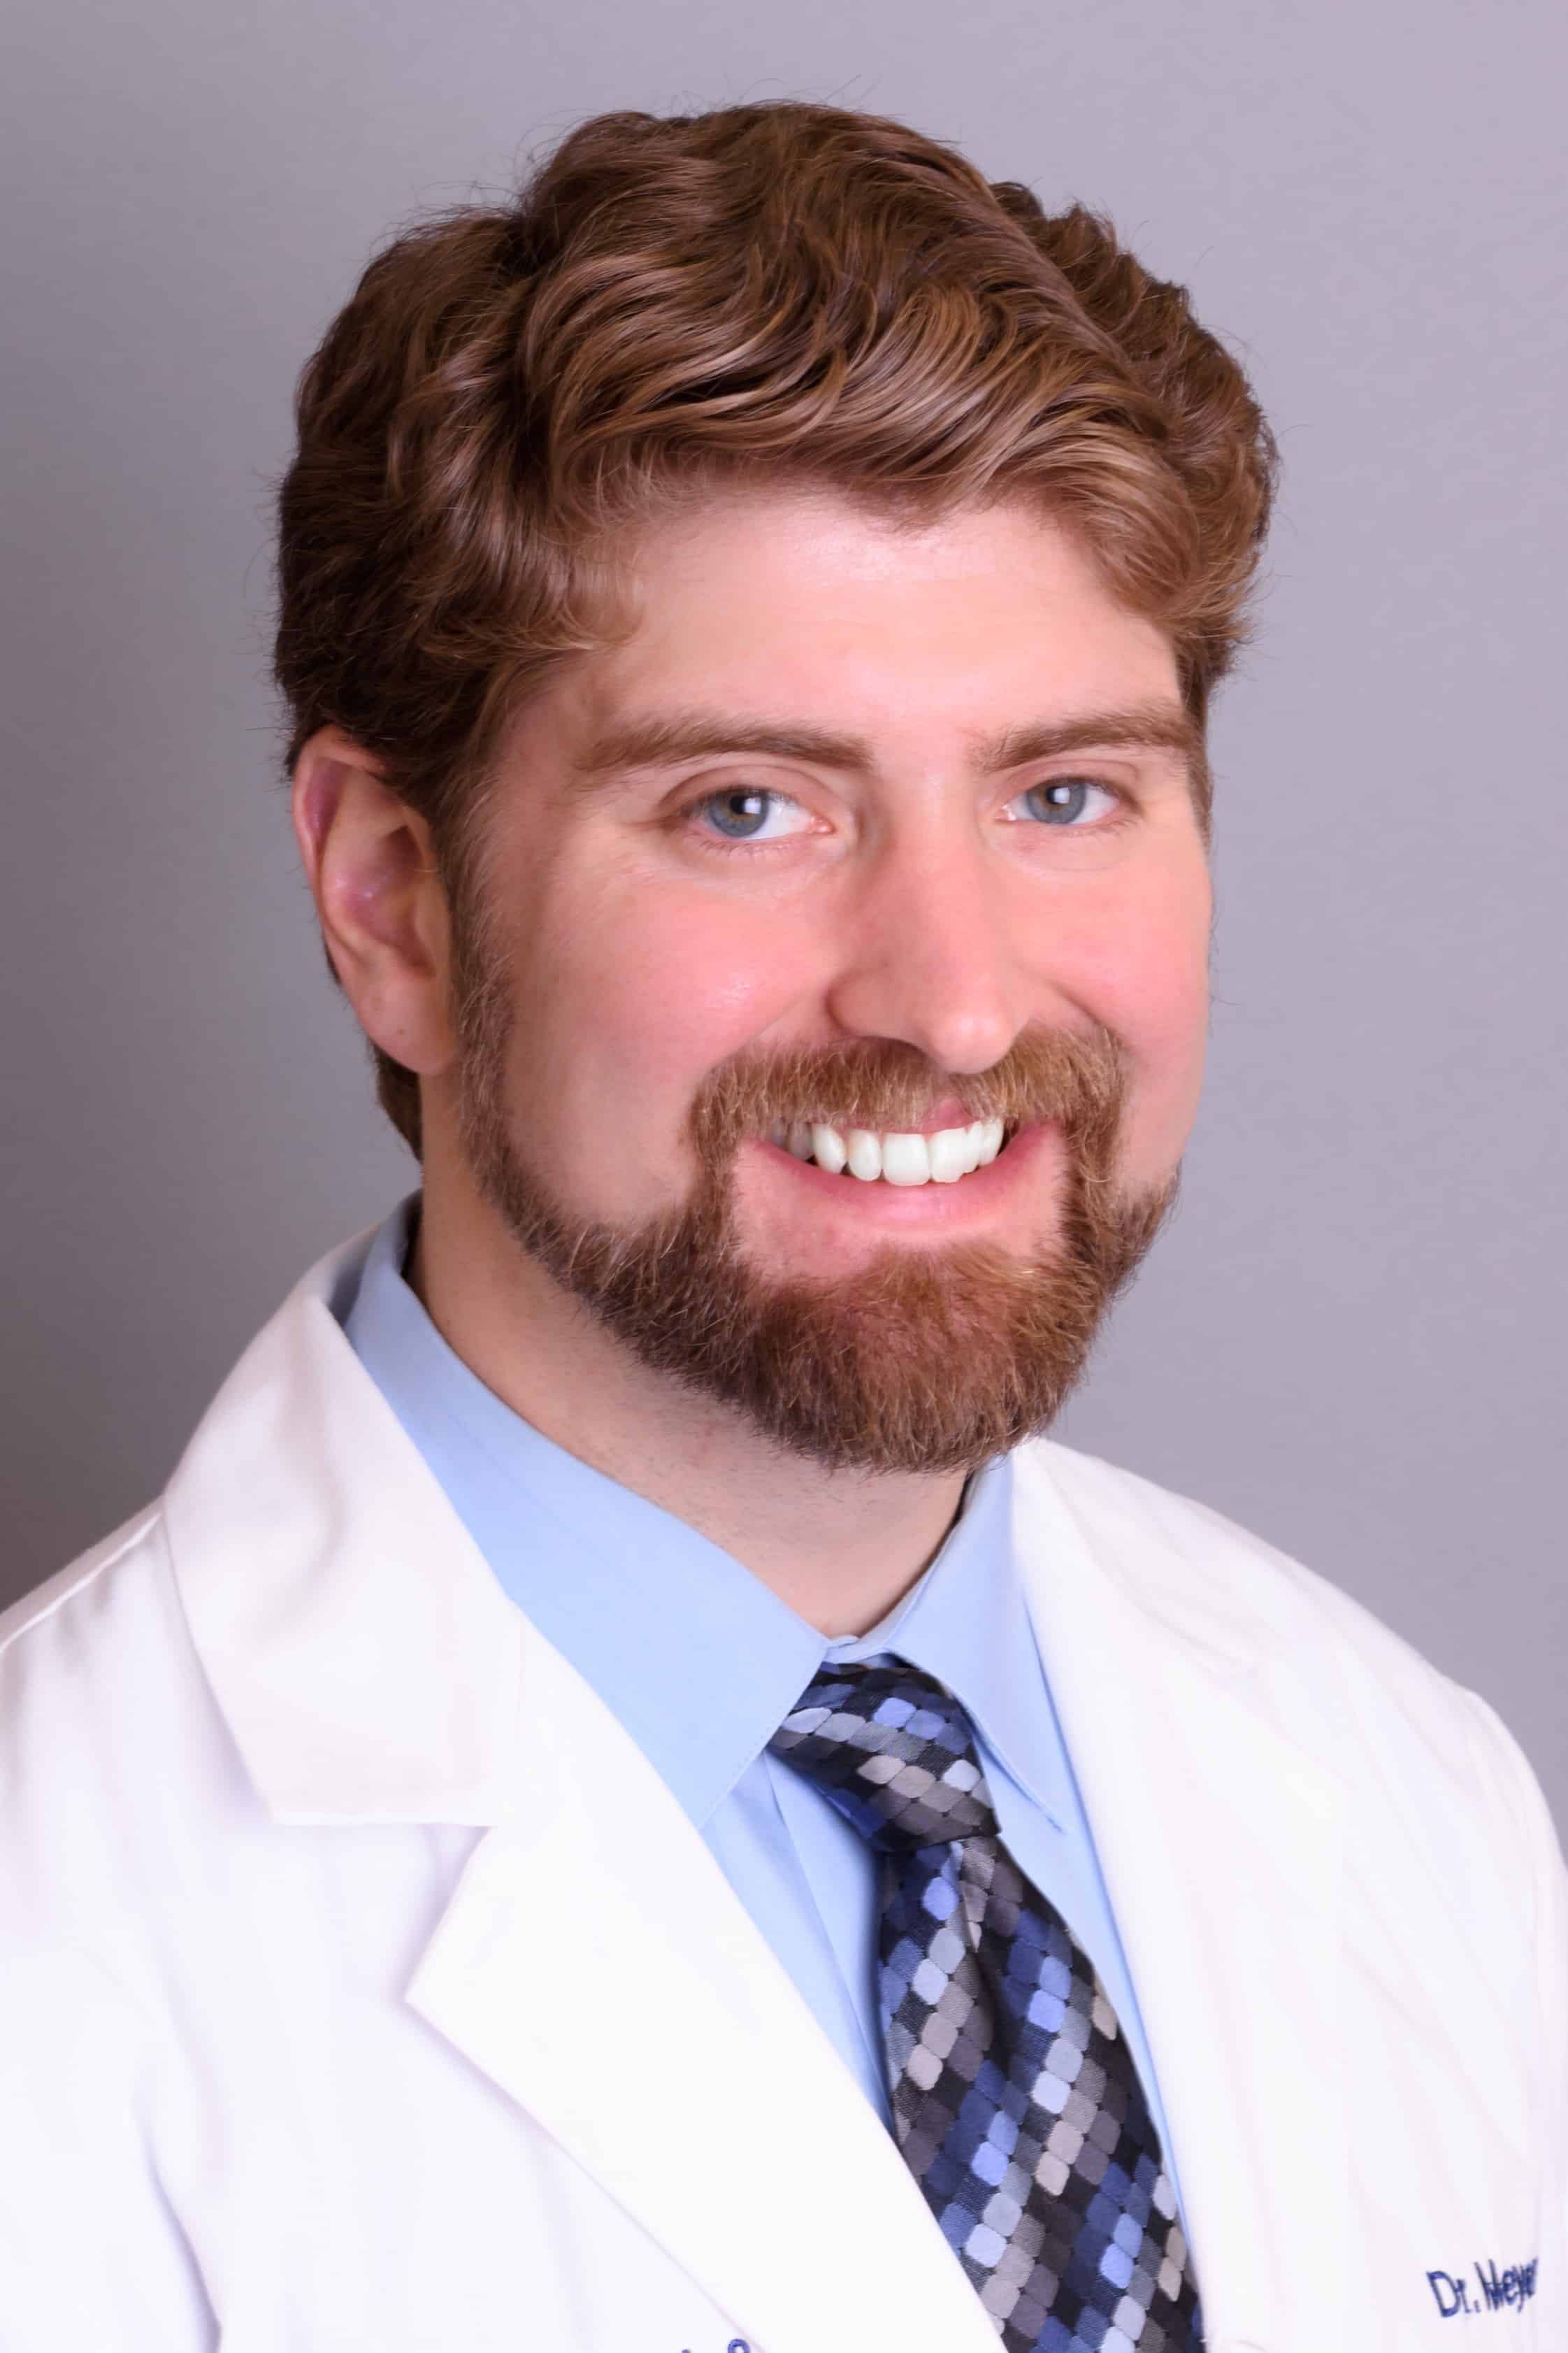 Foot and Ankle Surgeon Dr. Jordan Meyers